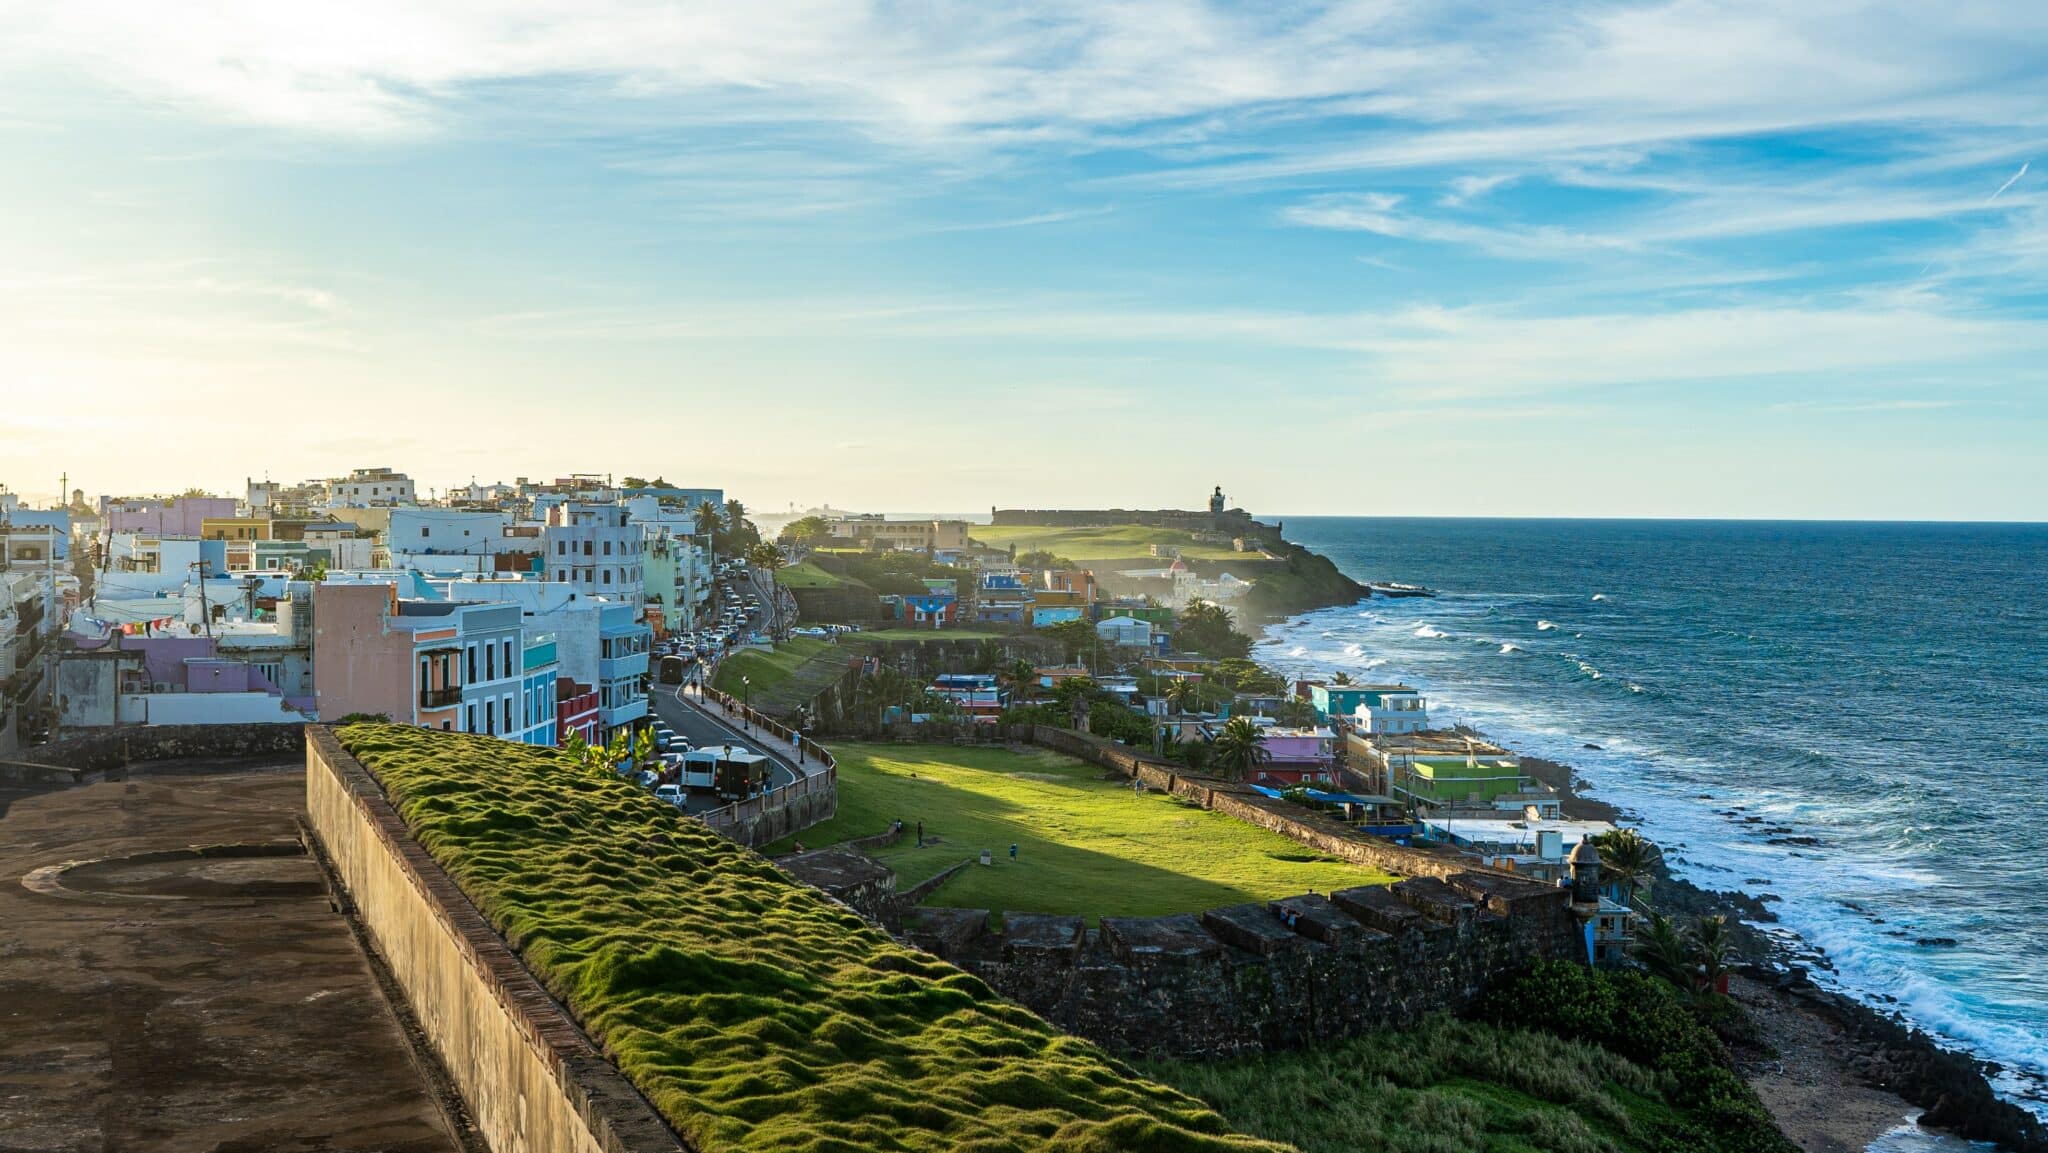 View of colorful buildings, dirt and asphalt walkways, lush, green grass, and the ocean off a cliffisde in San Juan, Puerto Rico